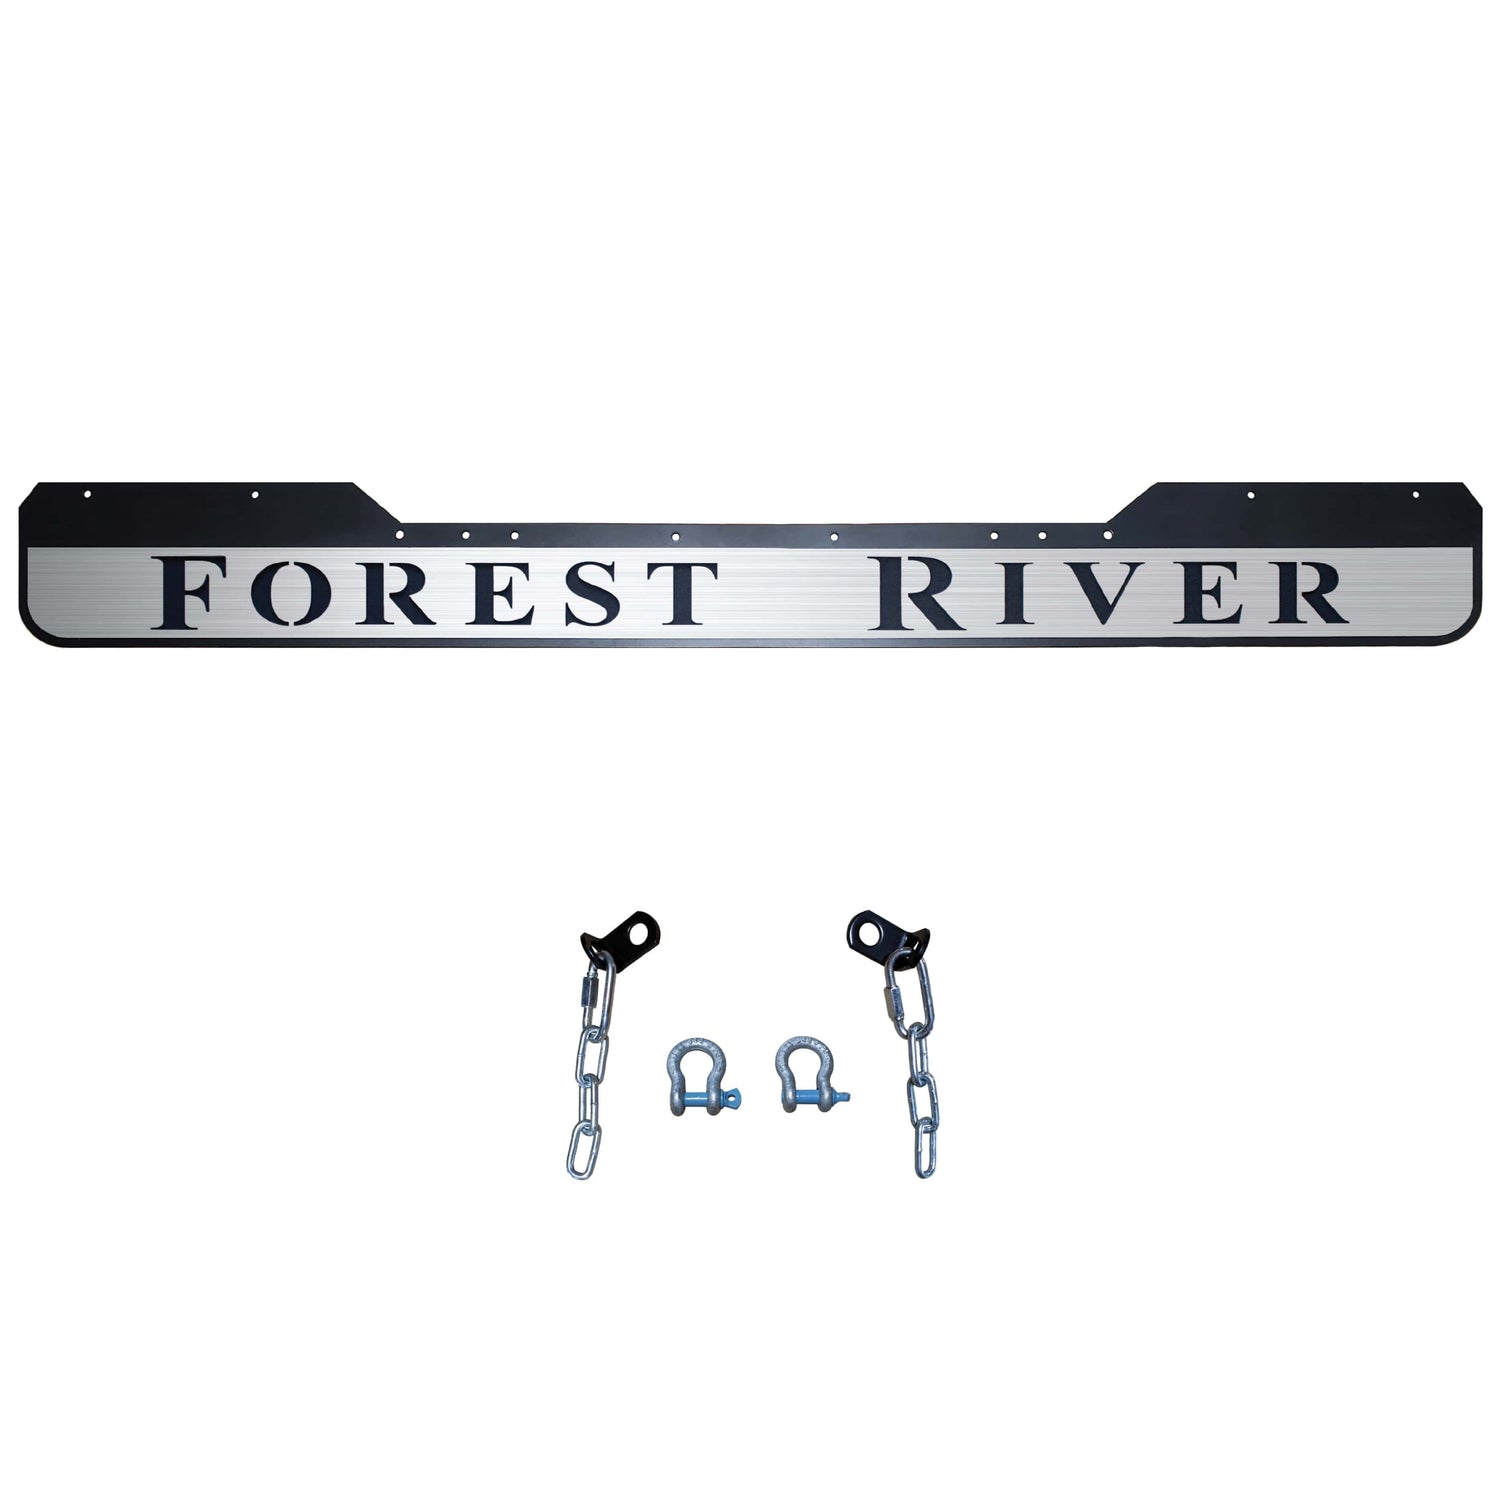 Future-Sales-Rock-Guard-FOREST RIVER-11-inch-MFR-FR-02NB-11-by-95-Center-Notch-Brushed-Finish-Face-Plate-hardware